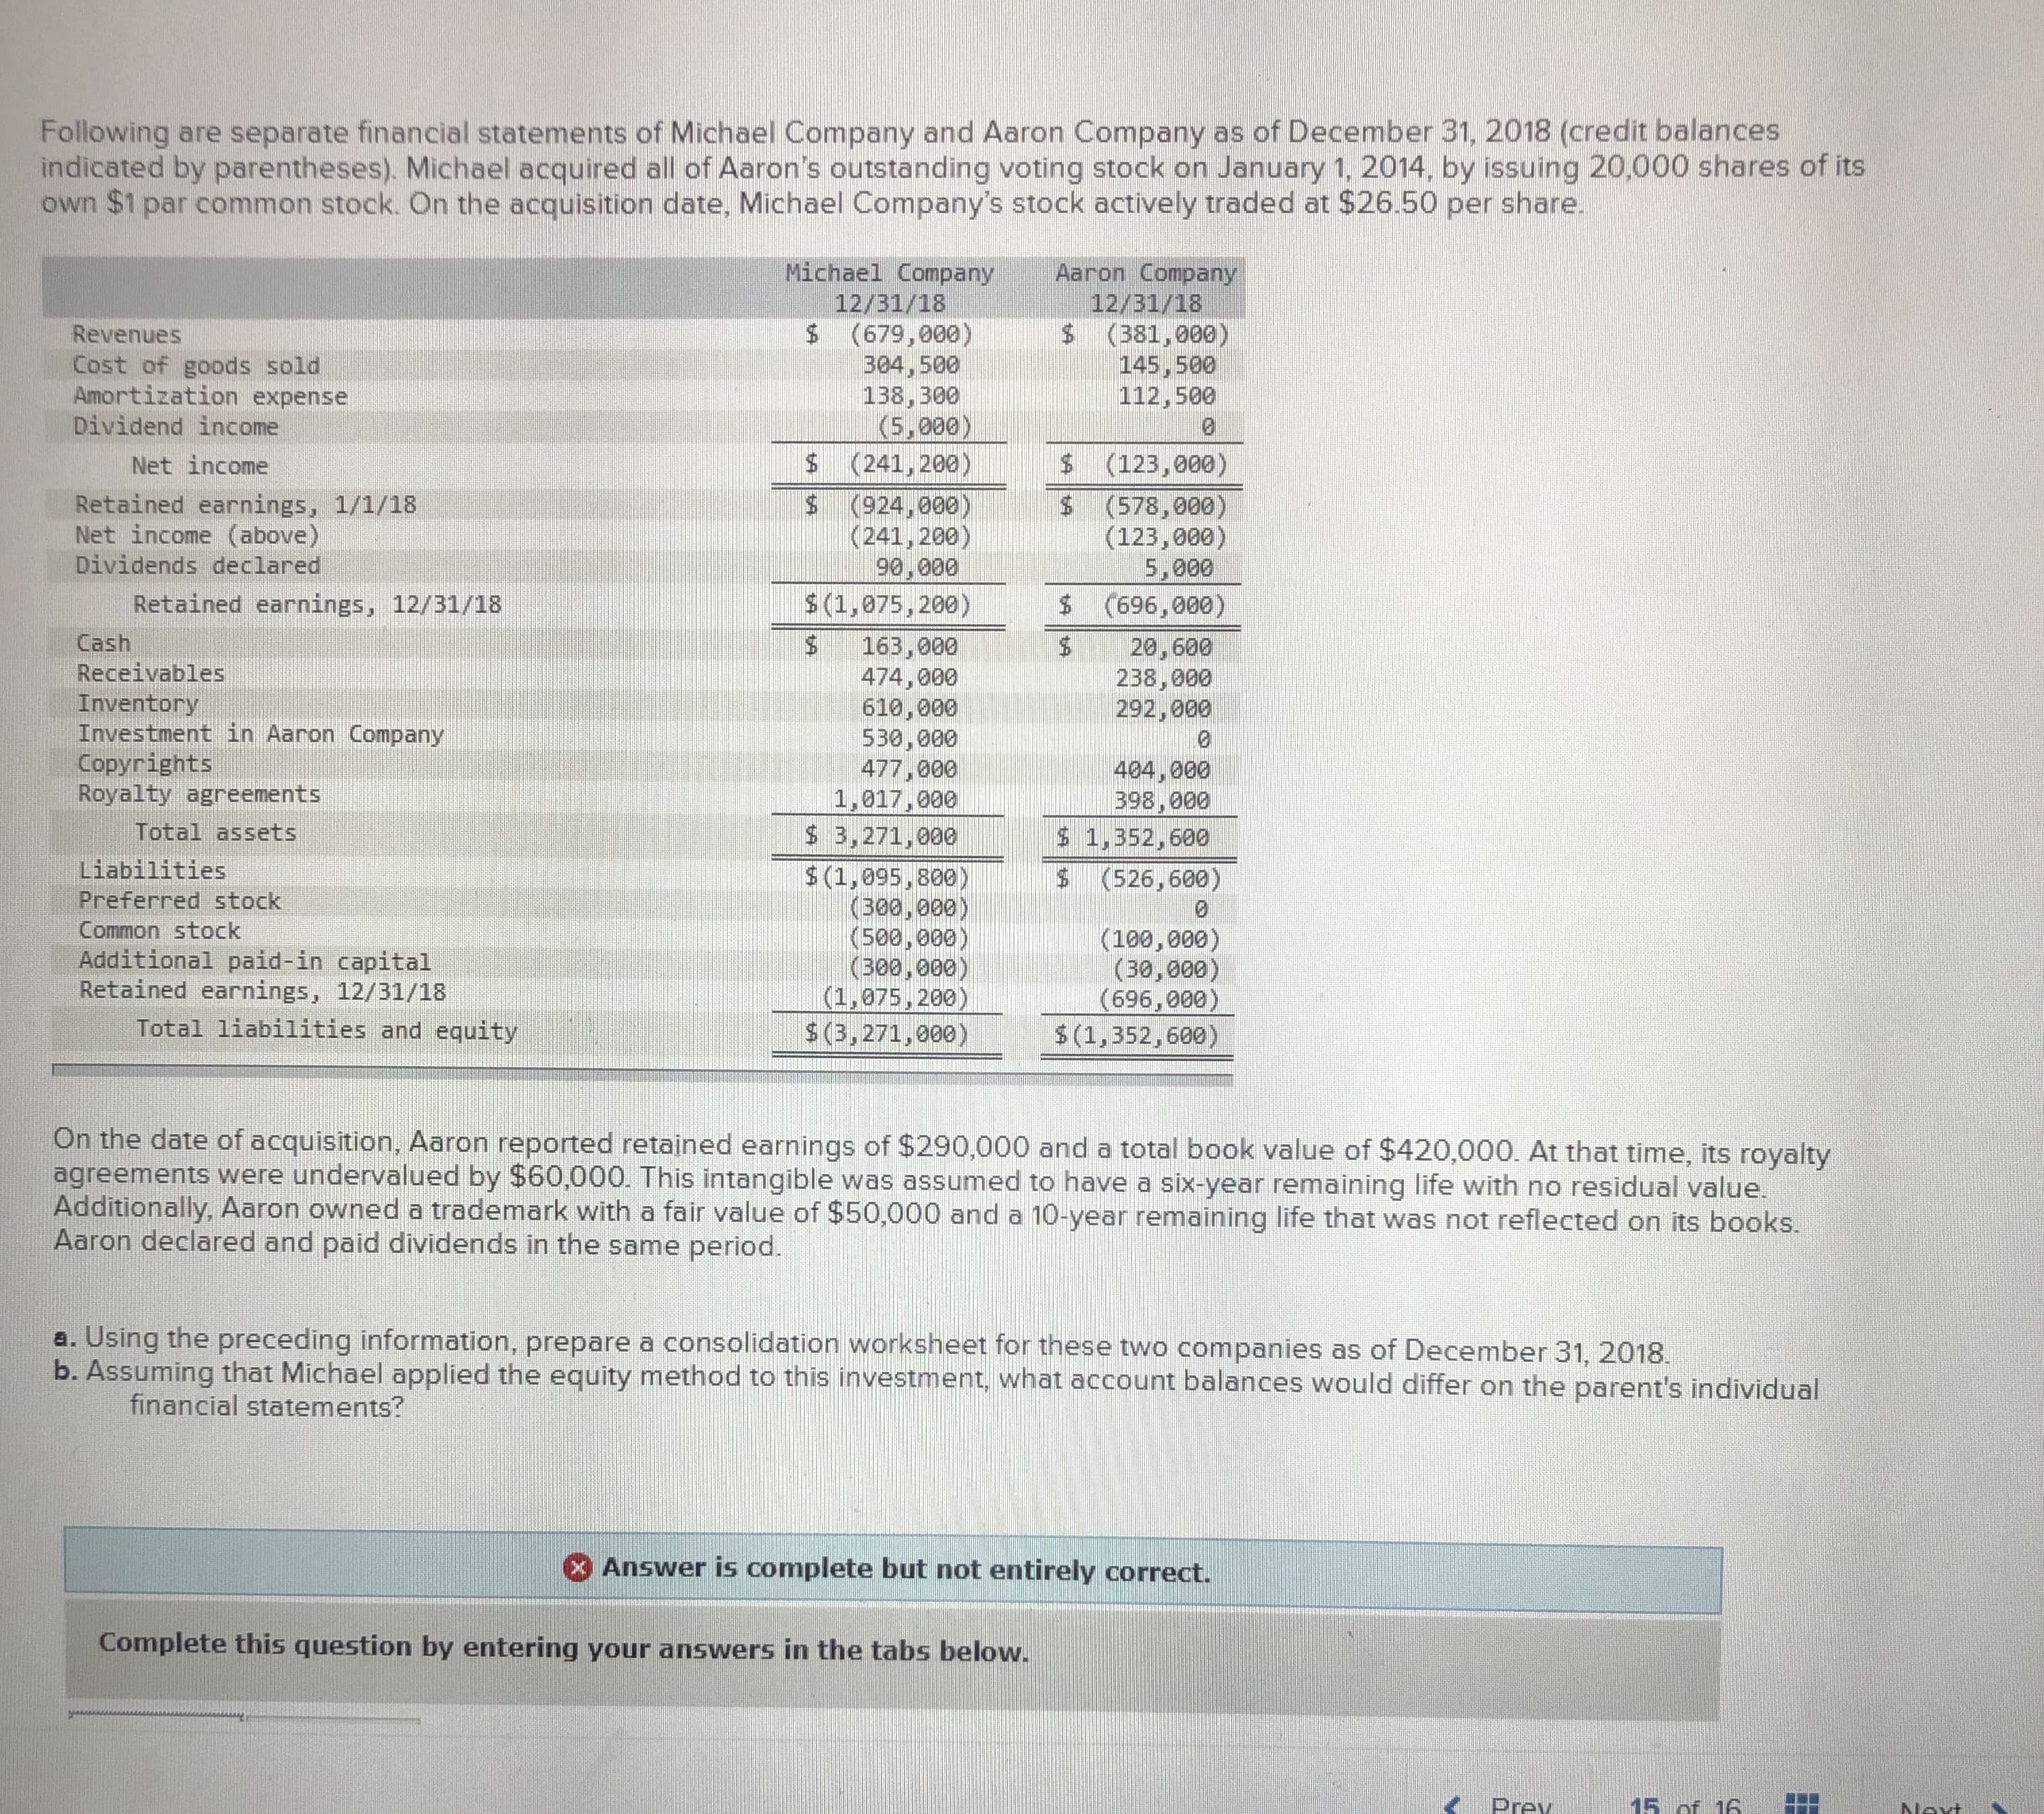 Following are separate financial statements of Michael Company and Aaron Company as of December 31, 2018 (credit balances
indicated by parentheses). Michael acquired all of Aaron's outstanding voting stock on January 1, 2014, by issuing 20,000 shares of its
own $1 par common stock. On the acquisition date, Michael Company's stock actively traded at $26.50 per share.
